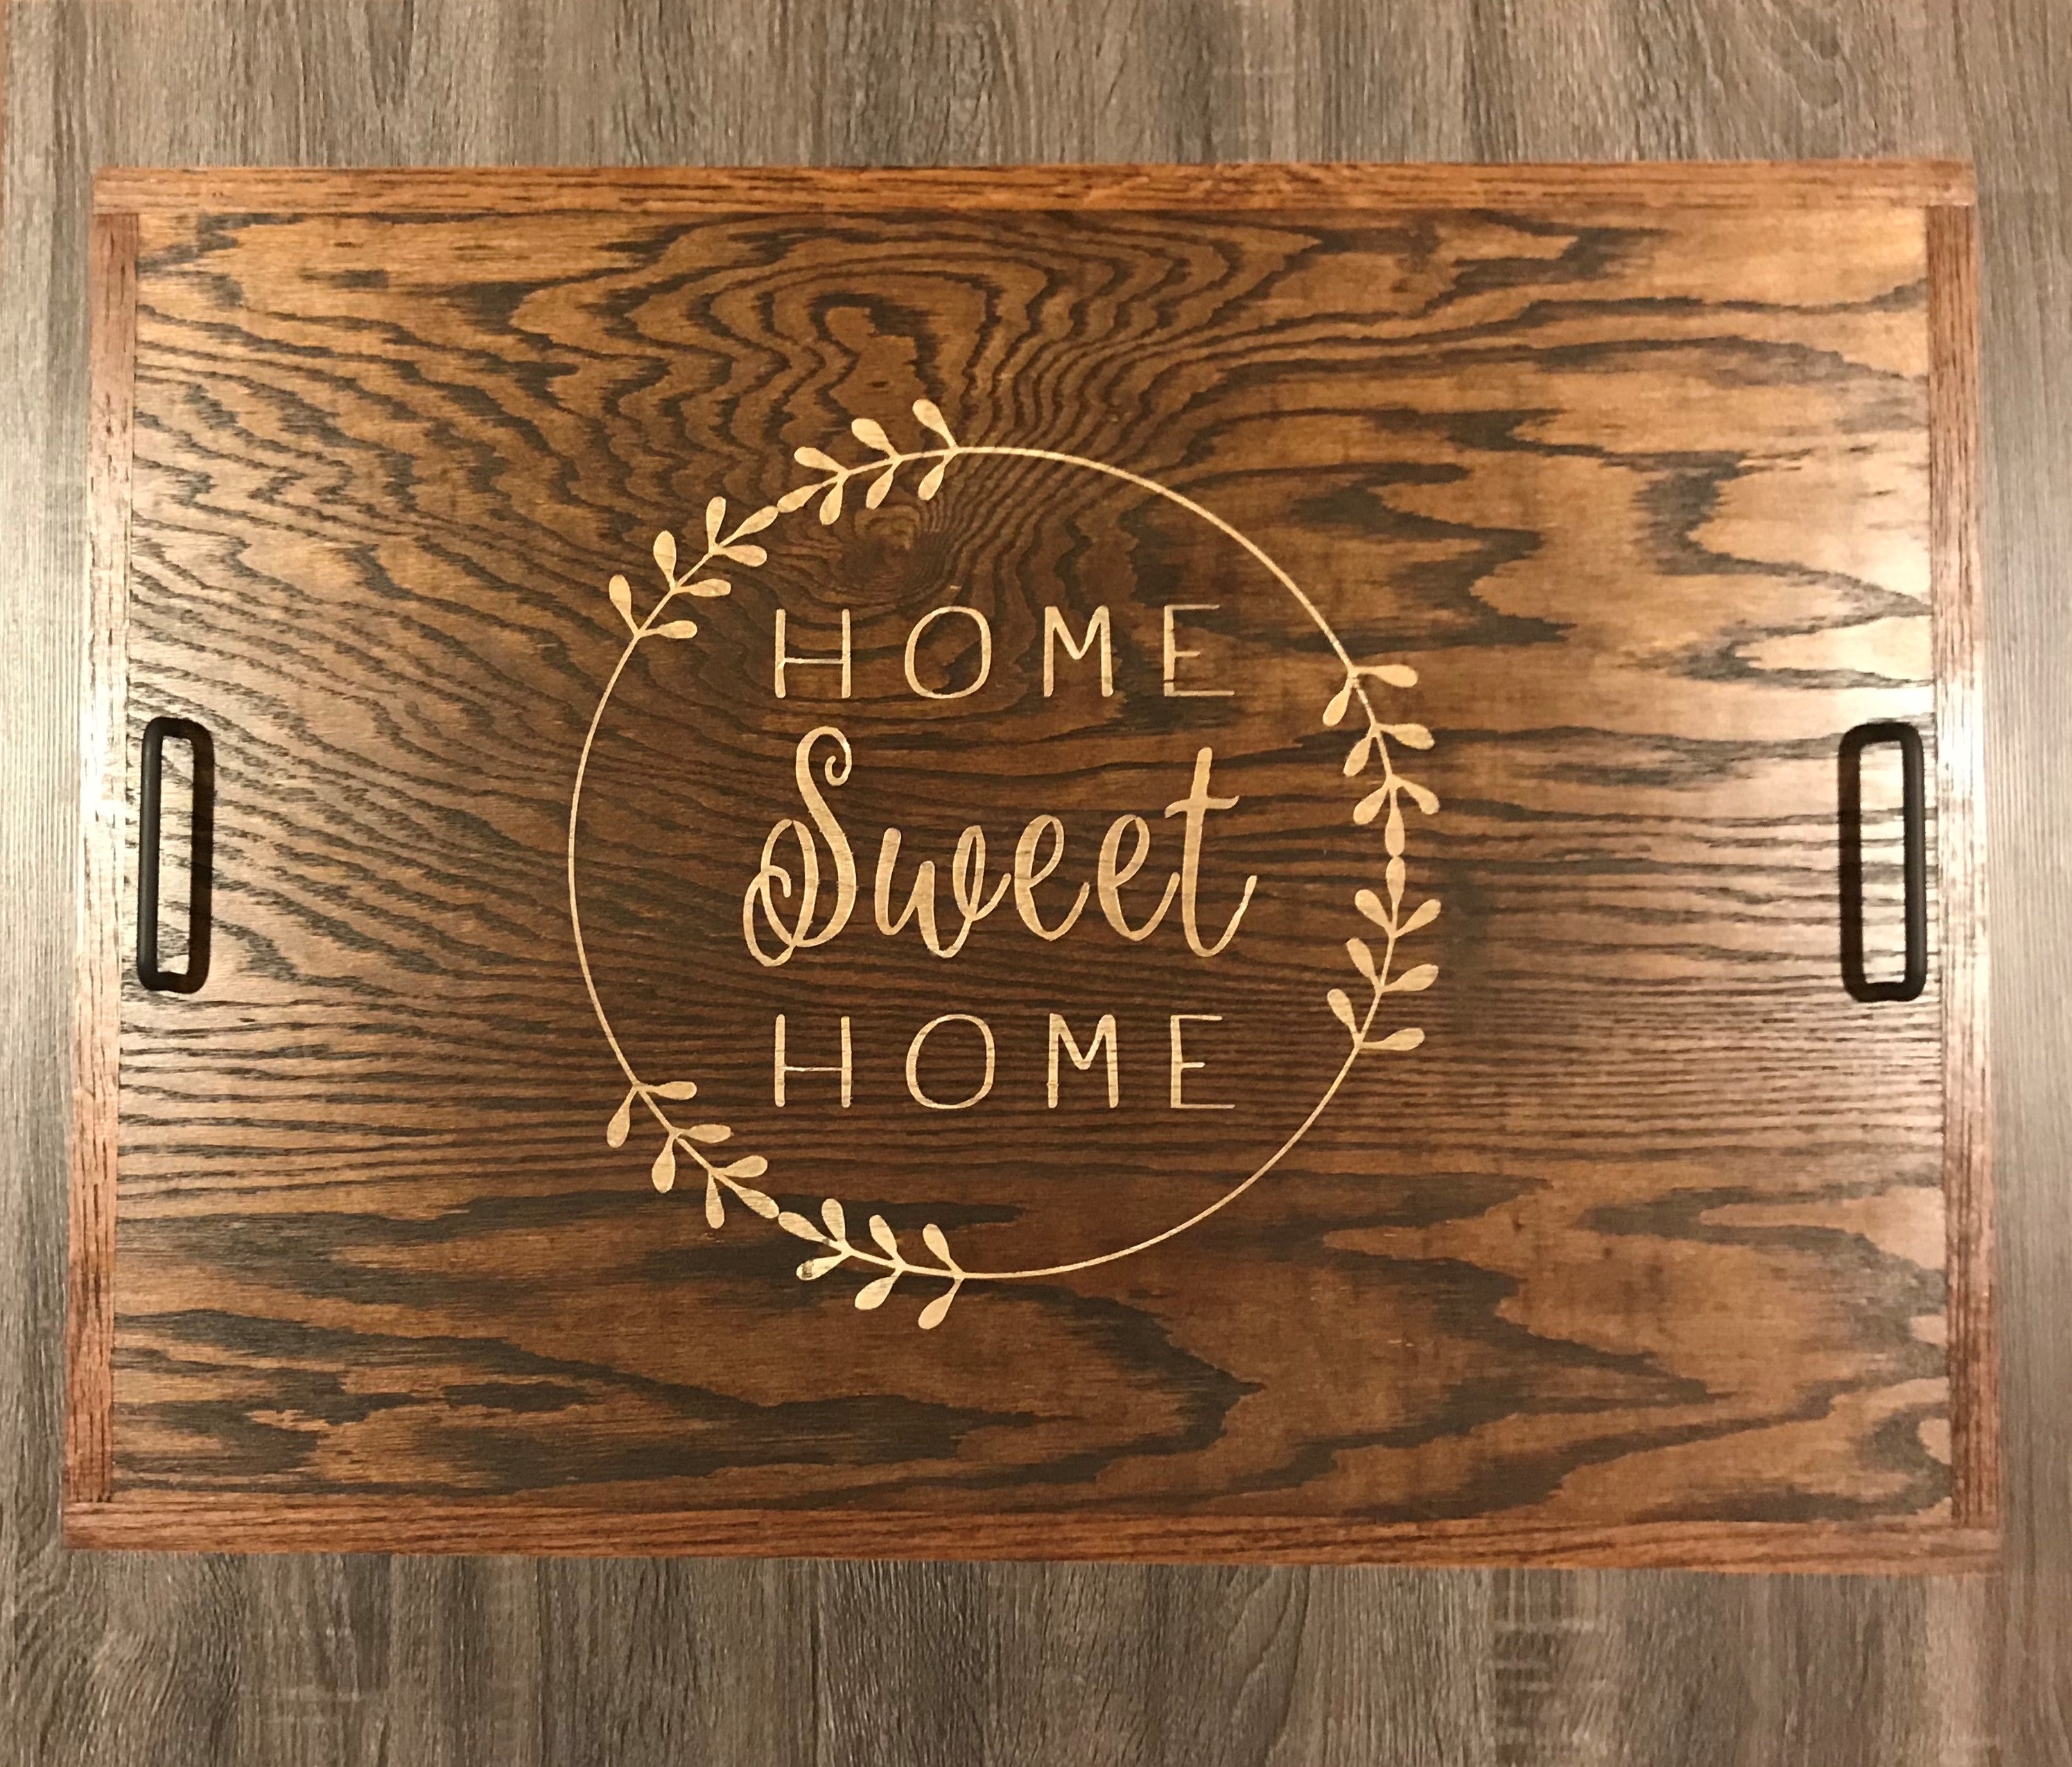 Stove Top Cover  DIY with custom design 